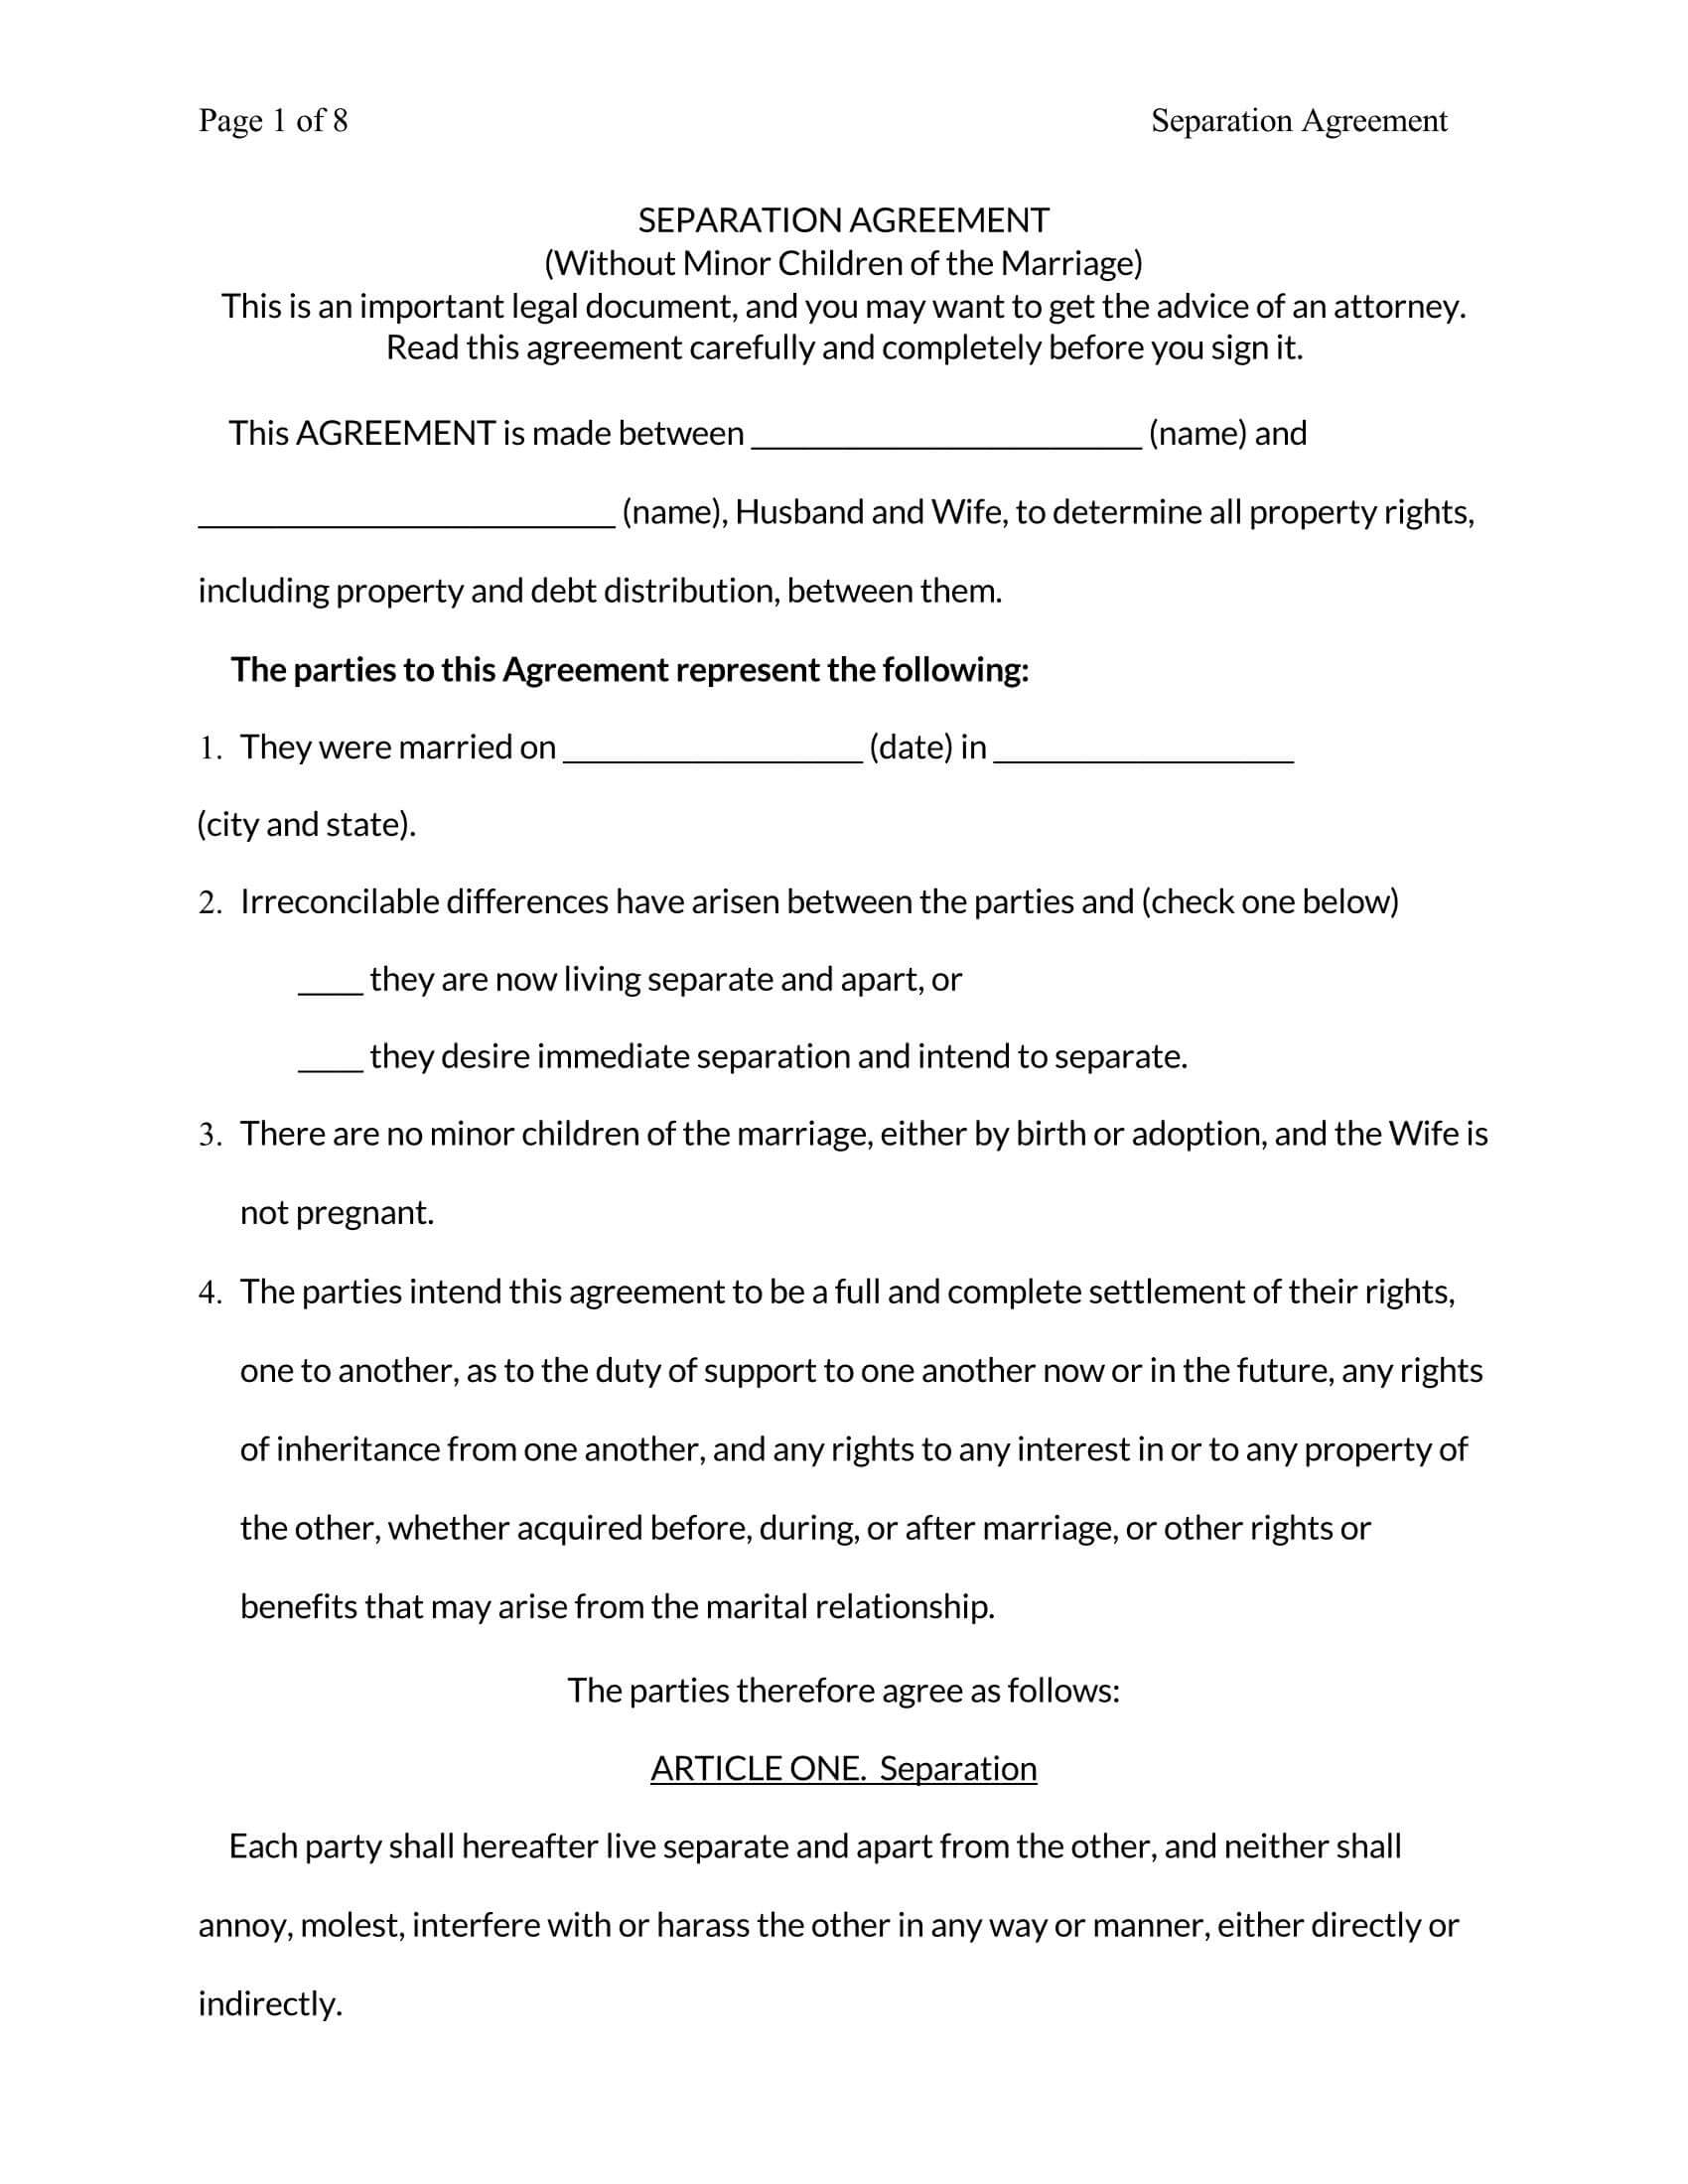 free employment separation agreement template